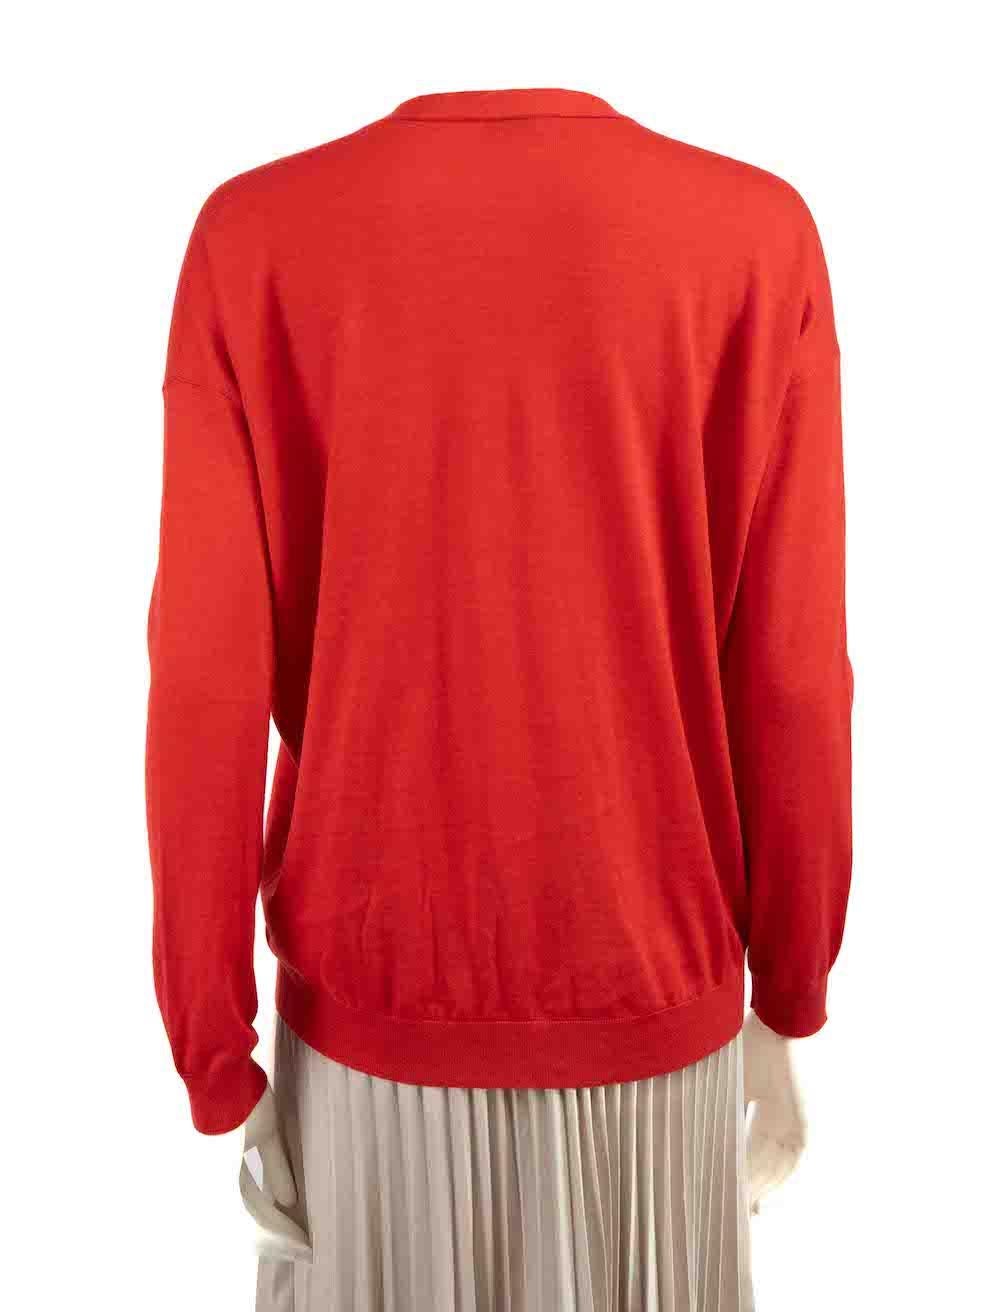 Brunello Cucinelli Red Cashmere Beaded V-Neck Top Size S In Good Condition For Sale In London, GB